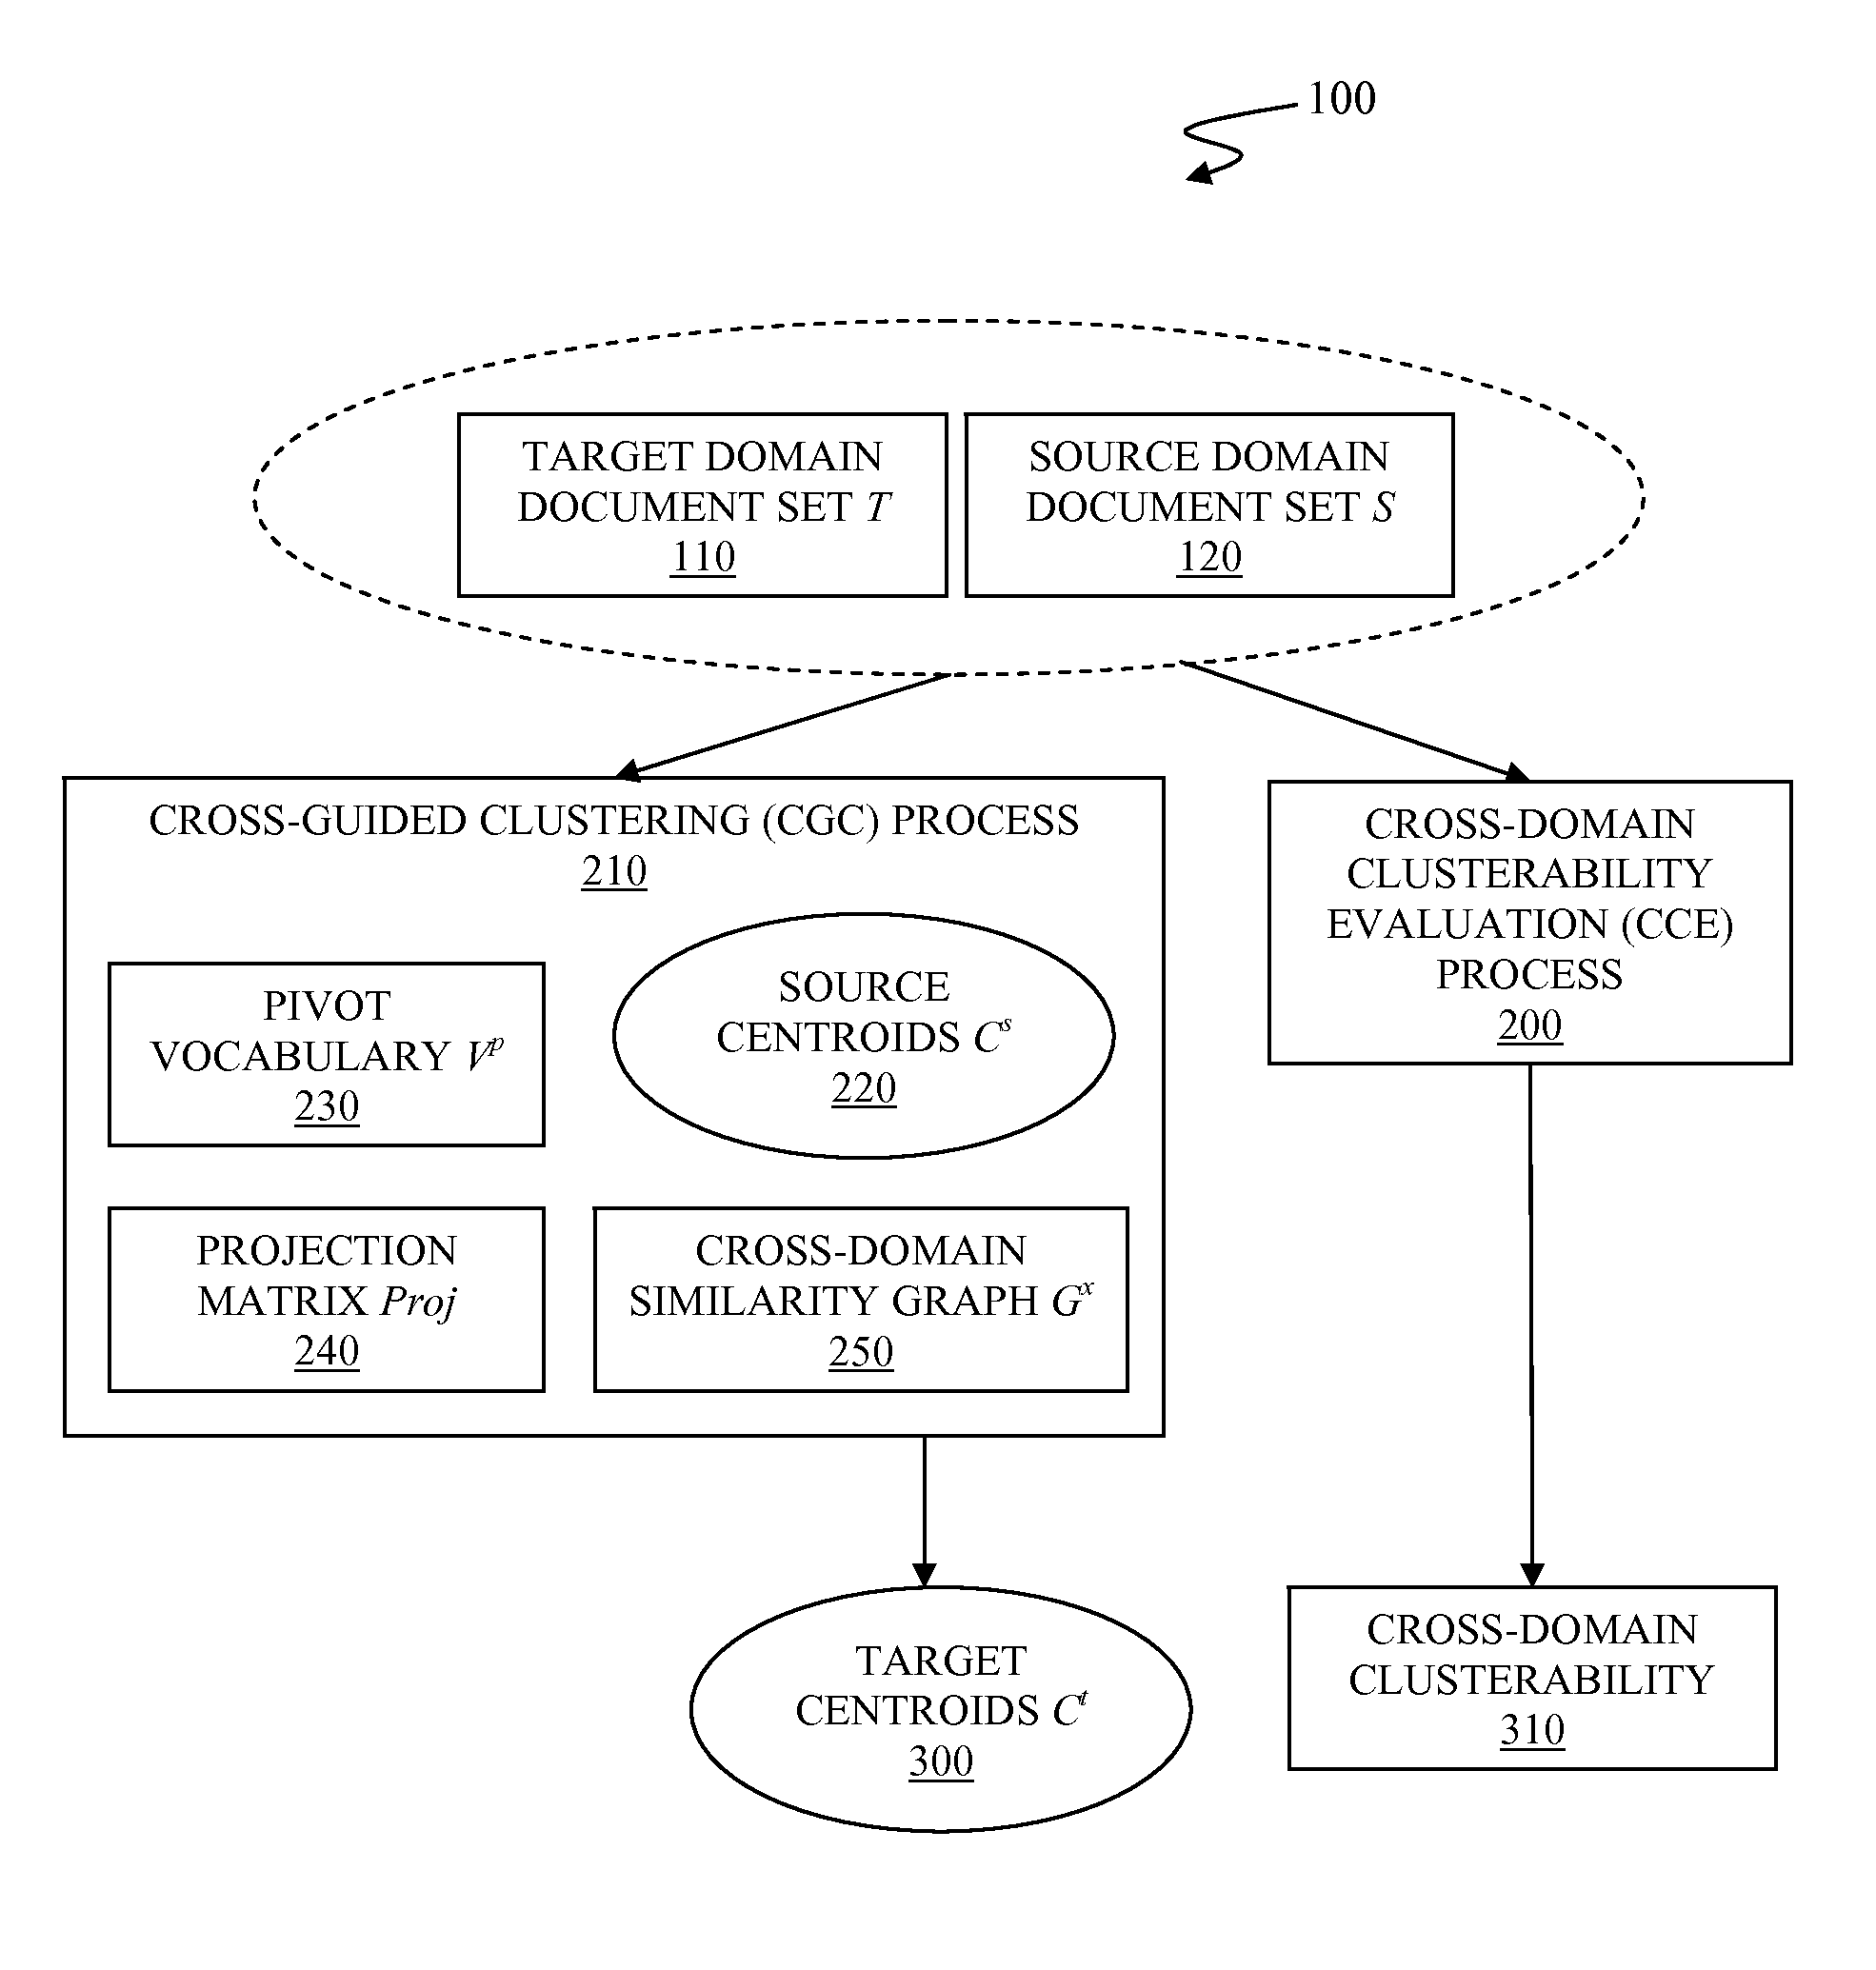 Cross-domain clusterability evaluation for cross-guided data clustering based on alignment between data domains